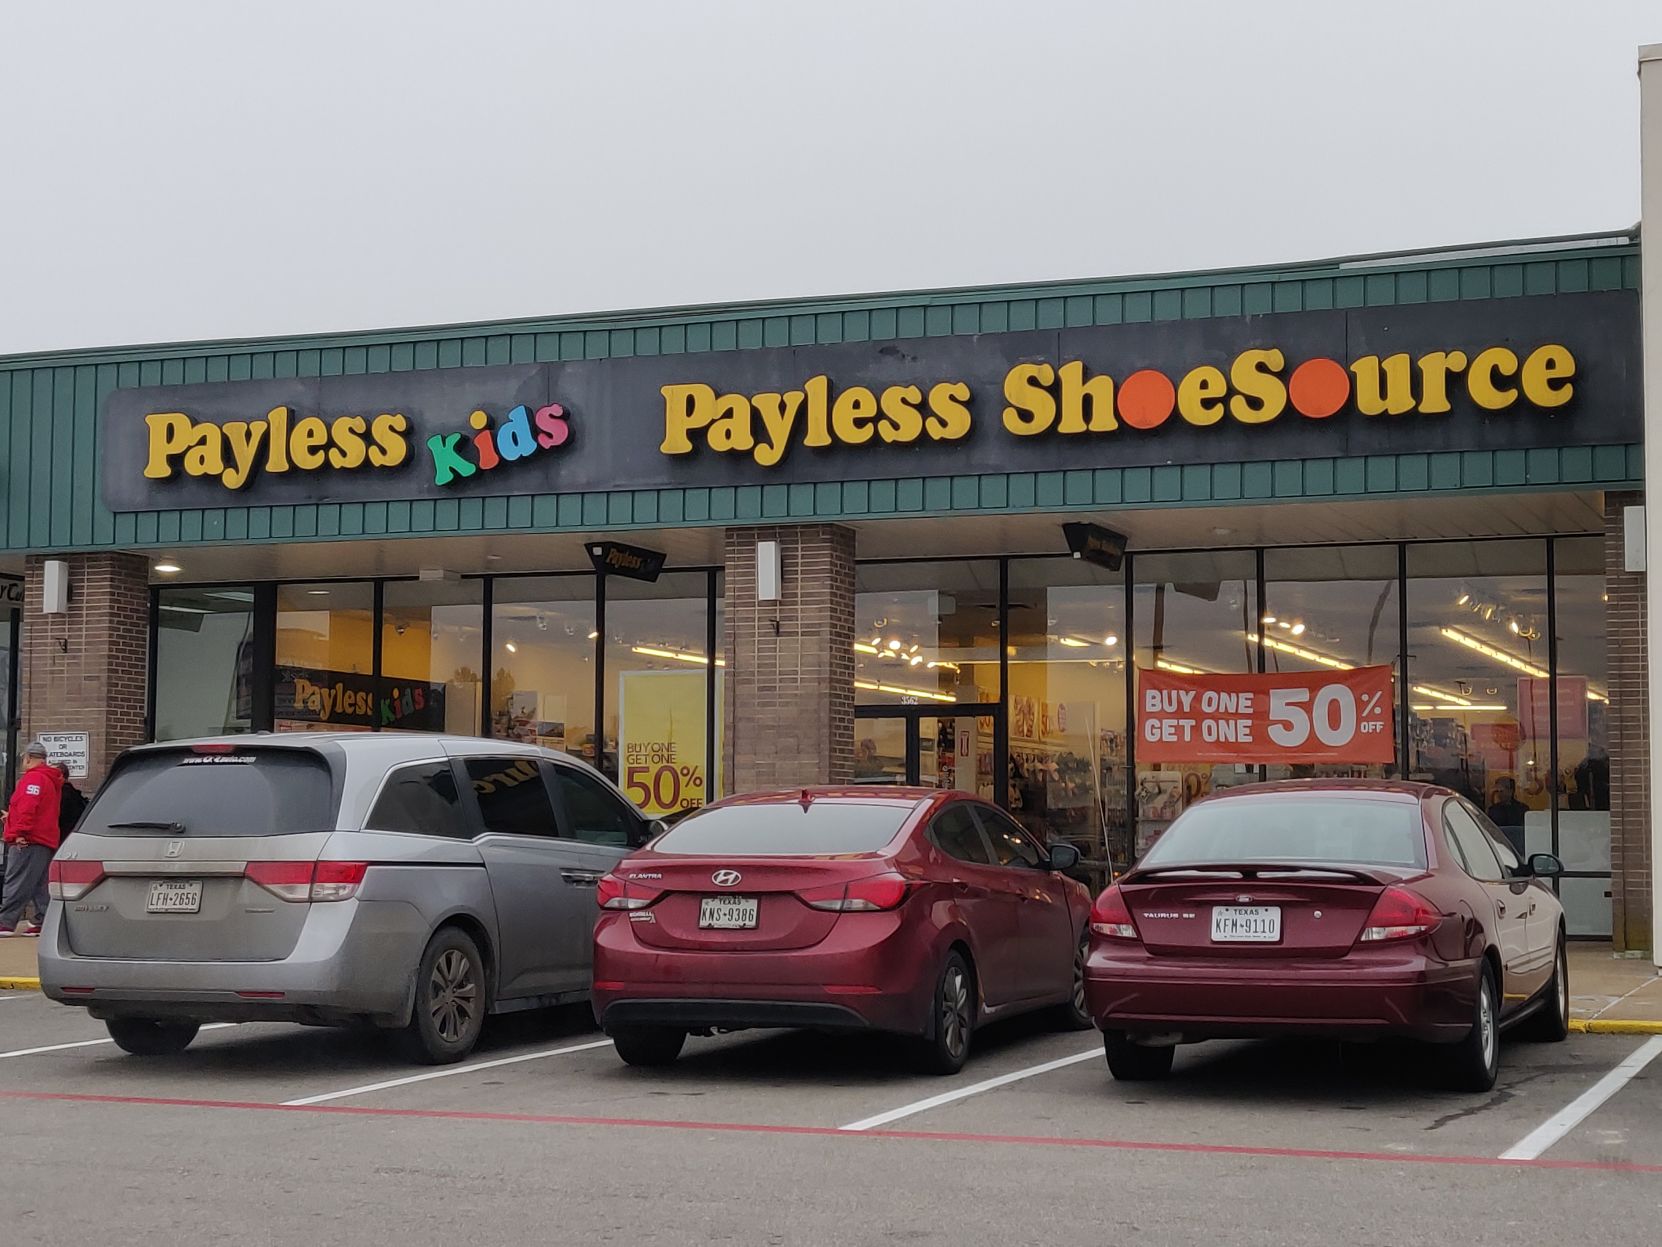 Paris Payless ShoeSource in countdown 